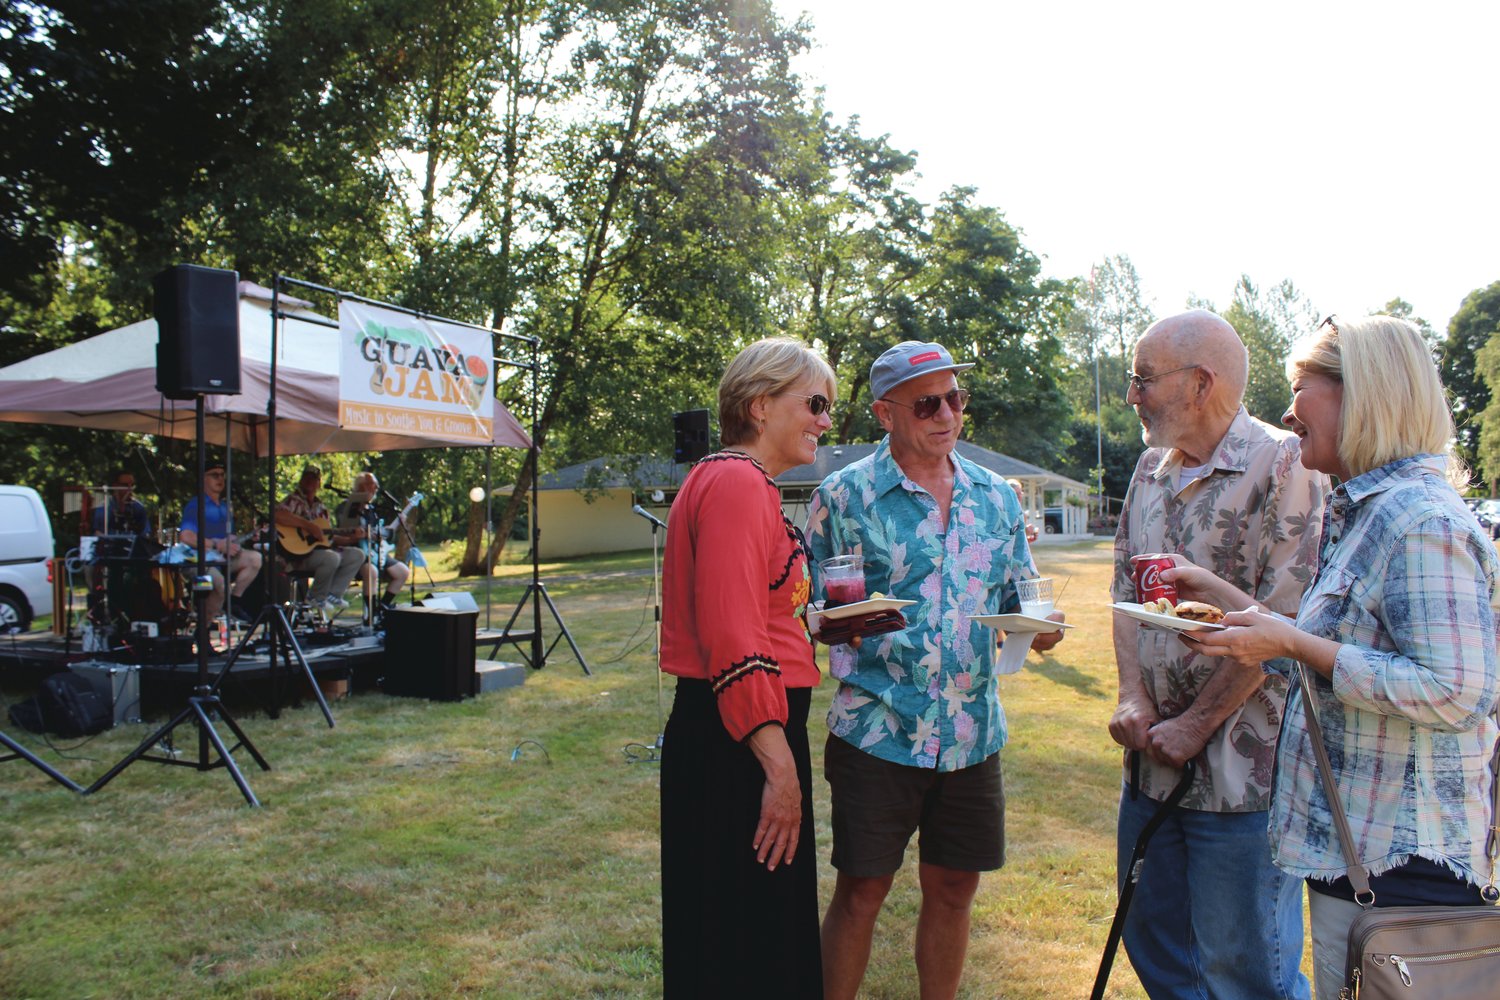 Marit Ernst and Dan Foster visit with friends John Alexander and Tiffany Alexander as the band Guava Jam plays at the Chehalis Foundation's Party in the Park fundraiser Friday night.